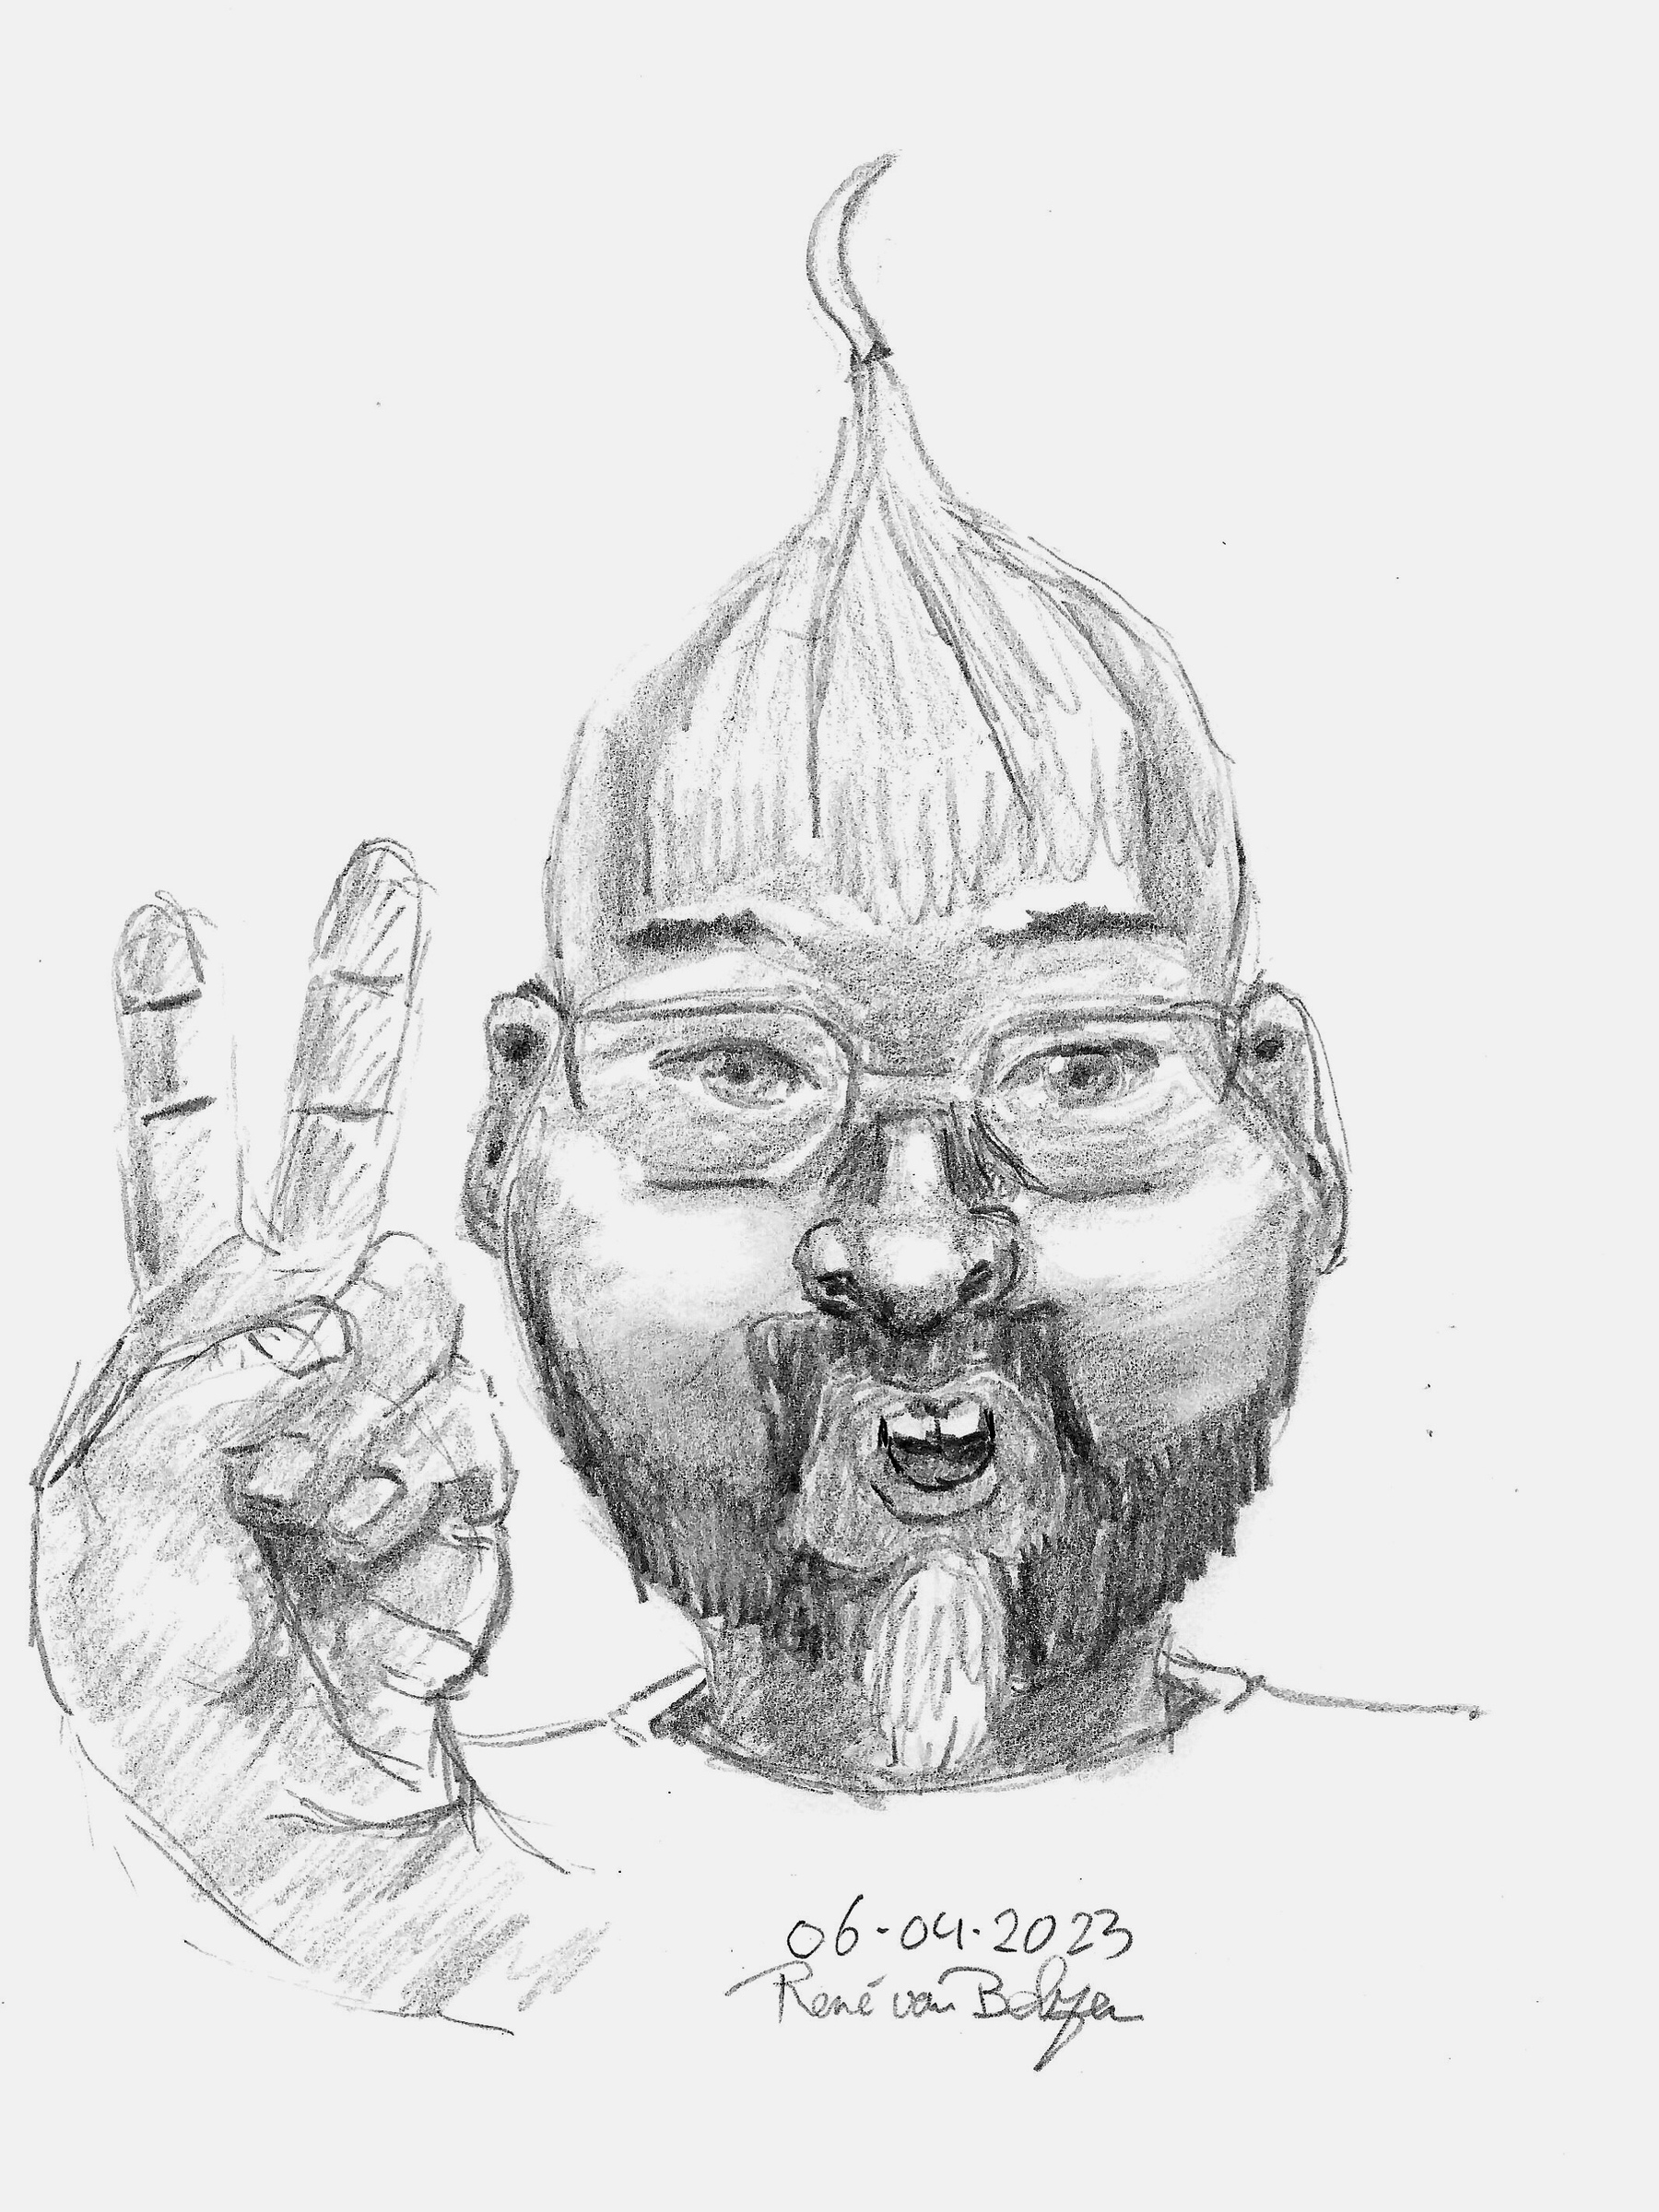 pencil sketch of a human head as an onion with a hand sticking up two fingers